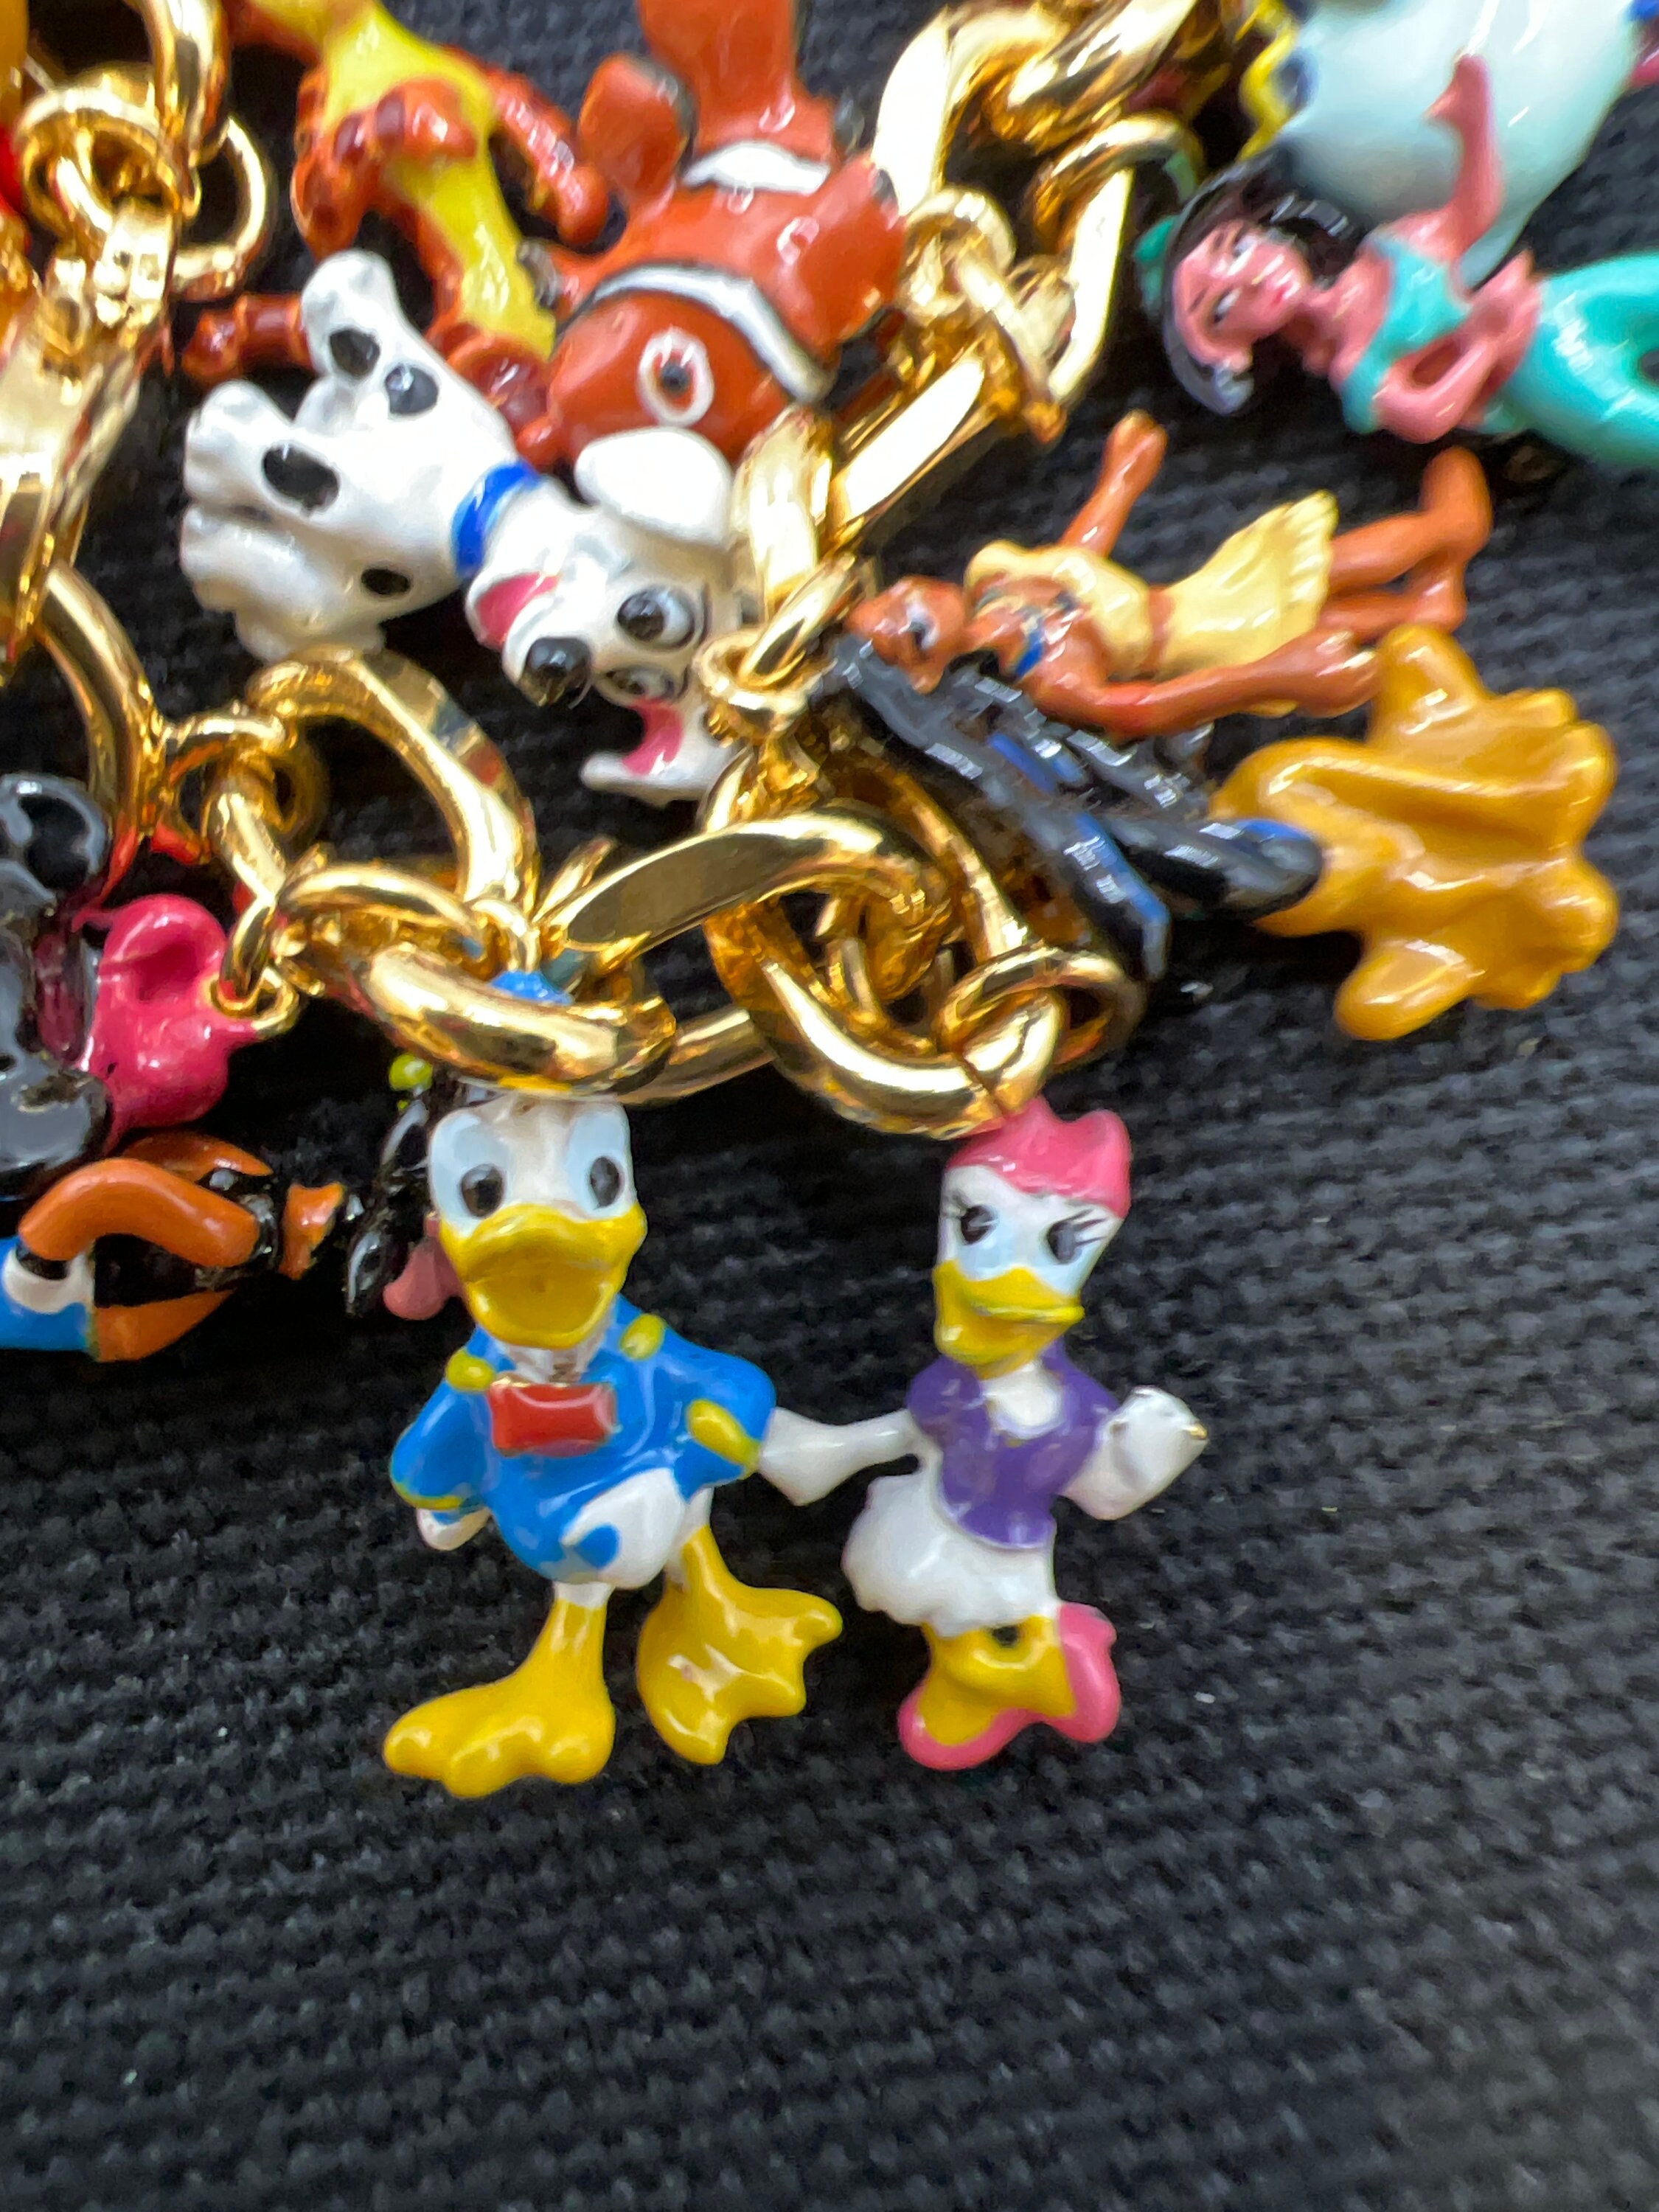 Ultimate Disney Classic Charm Bracelet Featuring 37 Disney Characters